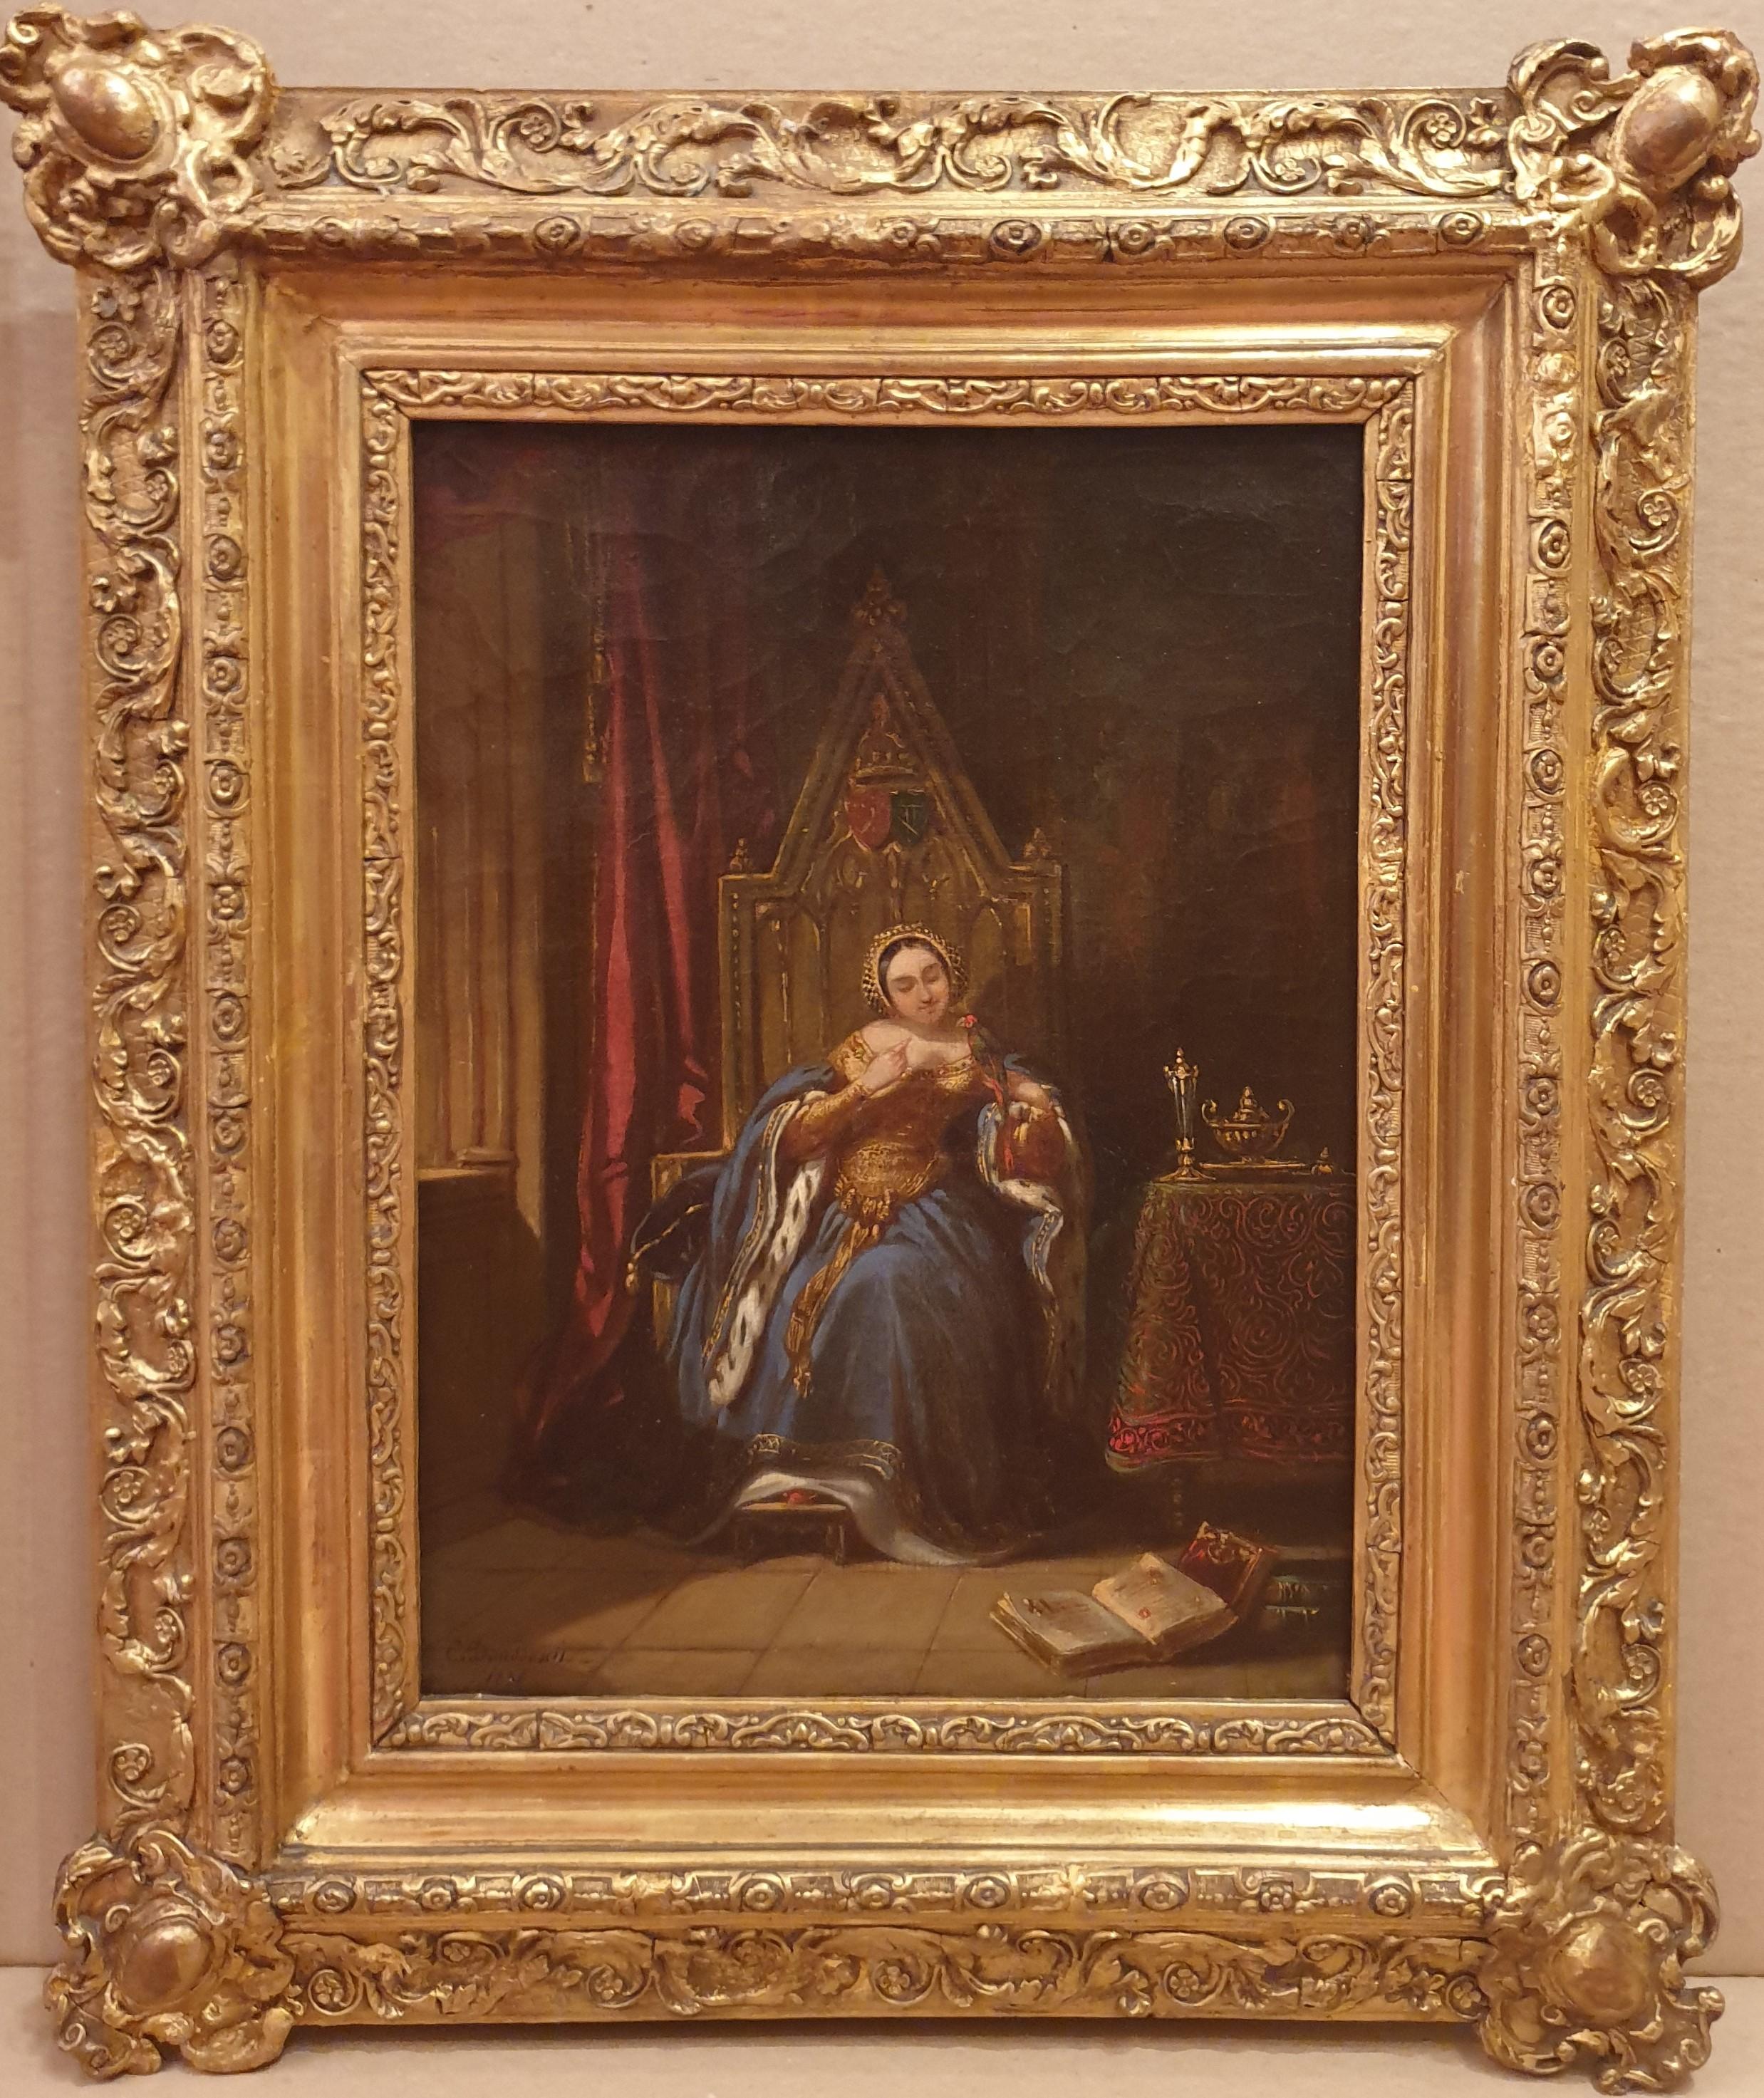 Charles DOUSSAULT 1814 - 1880
Oil on canvas
32.5 cm x 24.5 cm (52 x 41 cm with the frame)
Signed and dated lower left "Ch. Doussault / 1836"
Very beautiful period frame in gilded wood

Charles Doussault was an orientalist painter-traveler. He made a